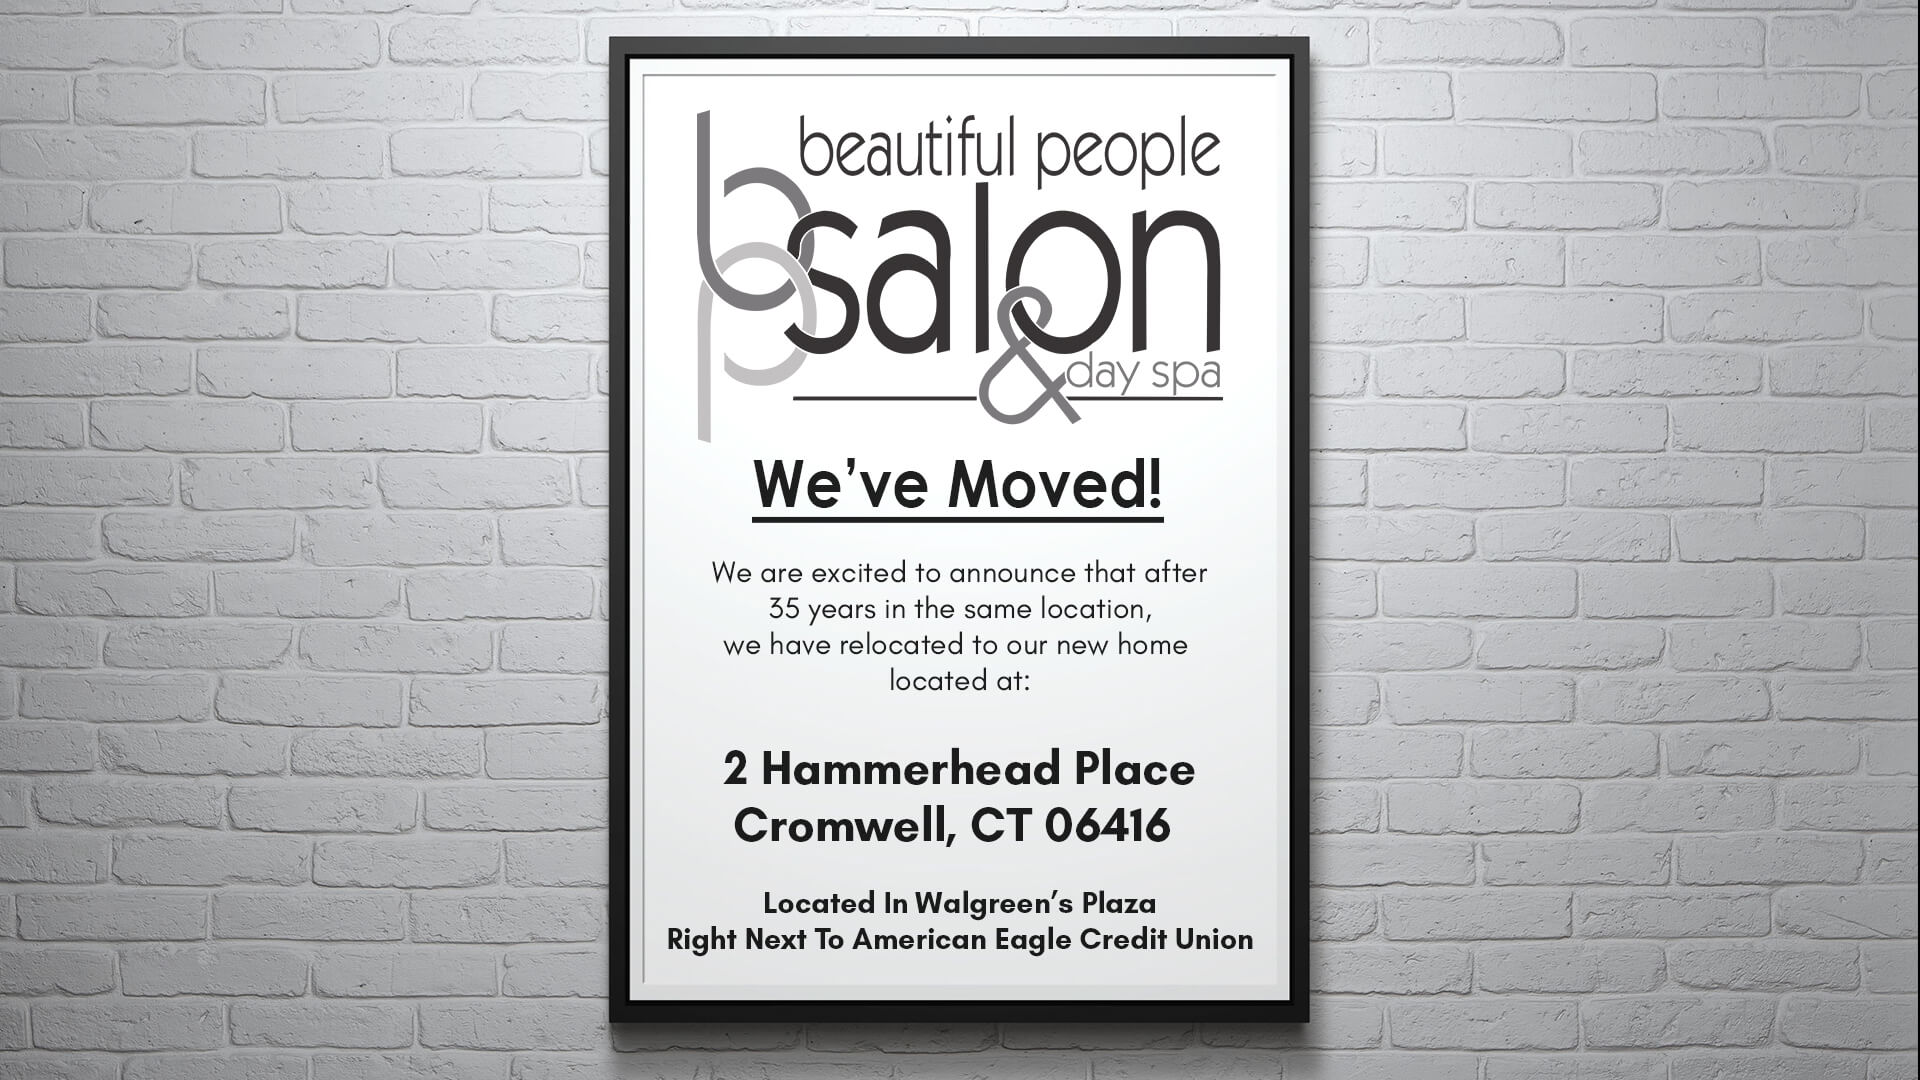 Salons Cromwell Ct Middletown Ct Berlin Ct